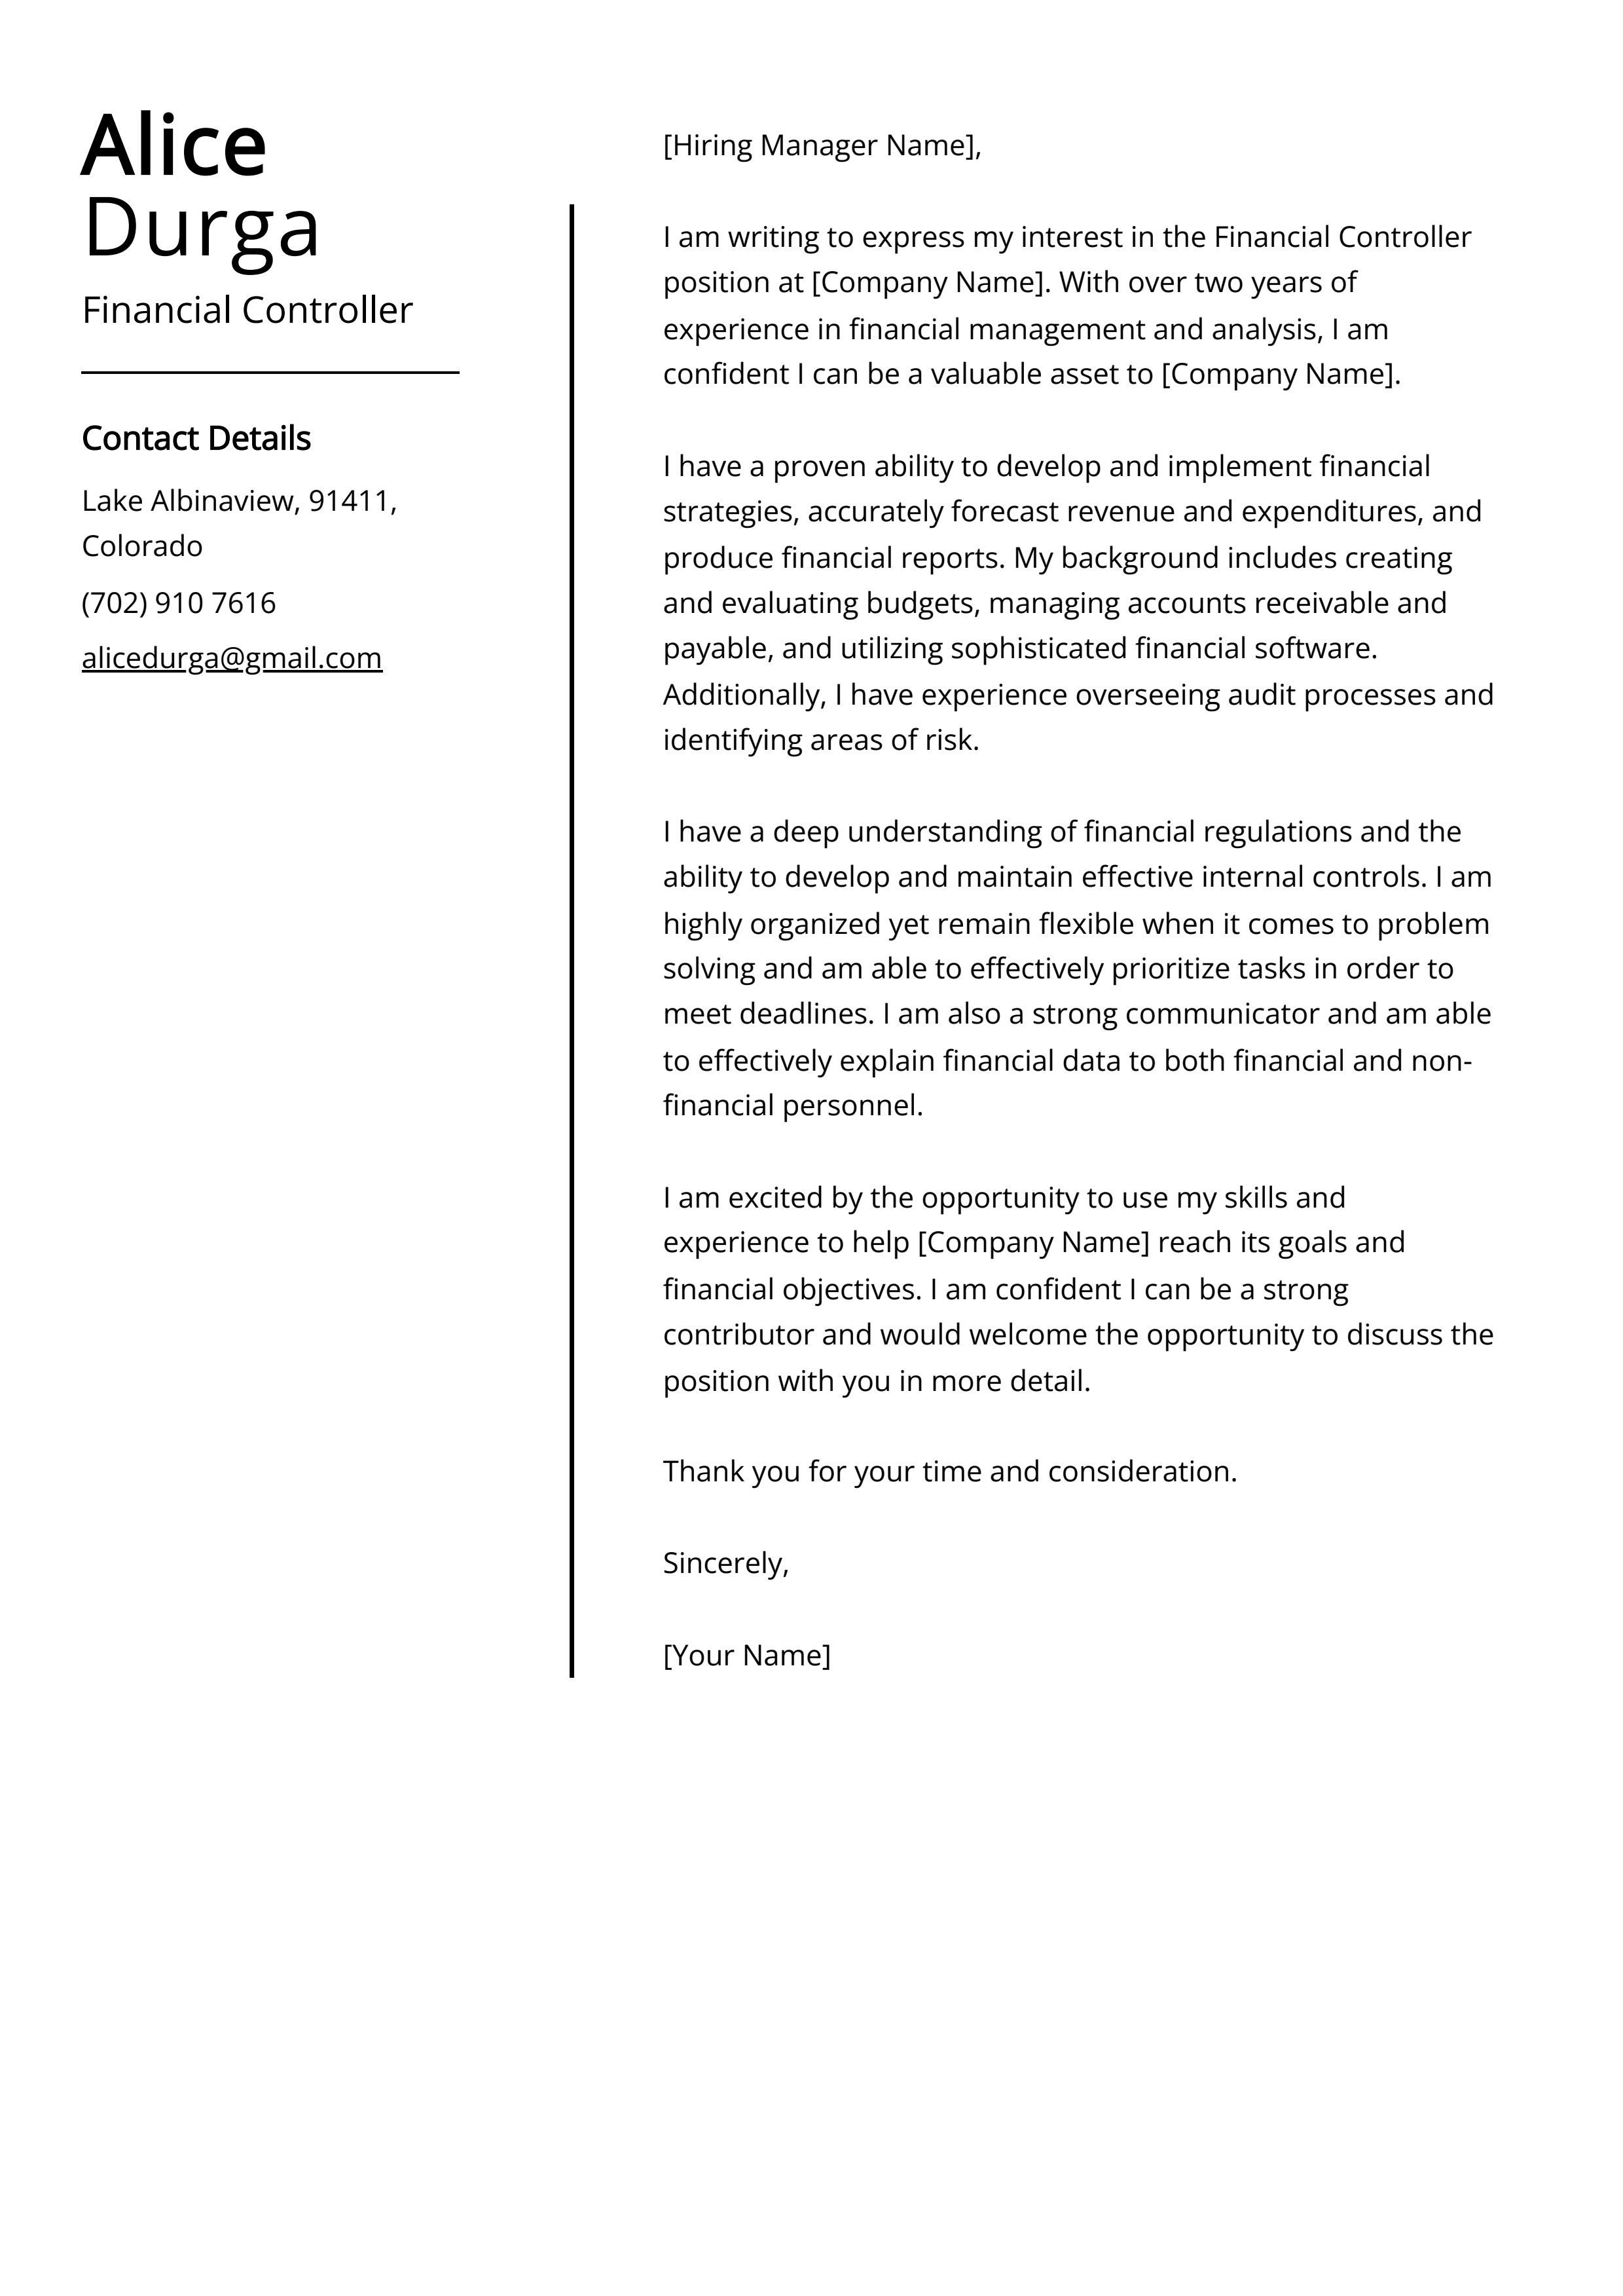 Financial Controller Cover Letter Example